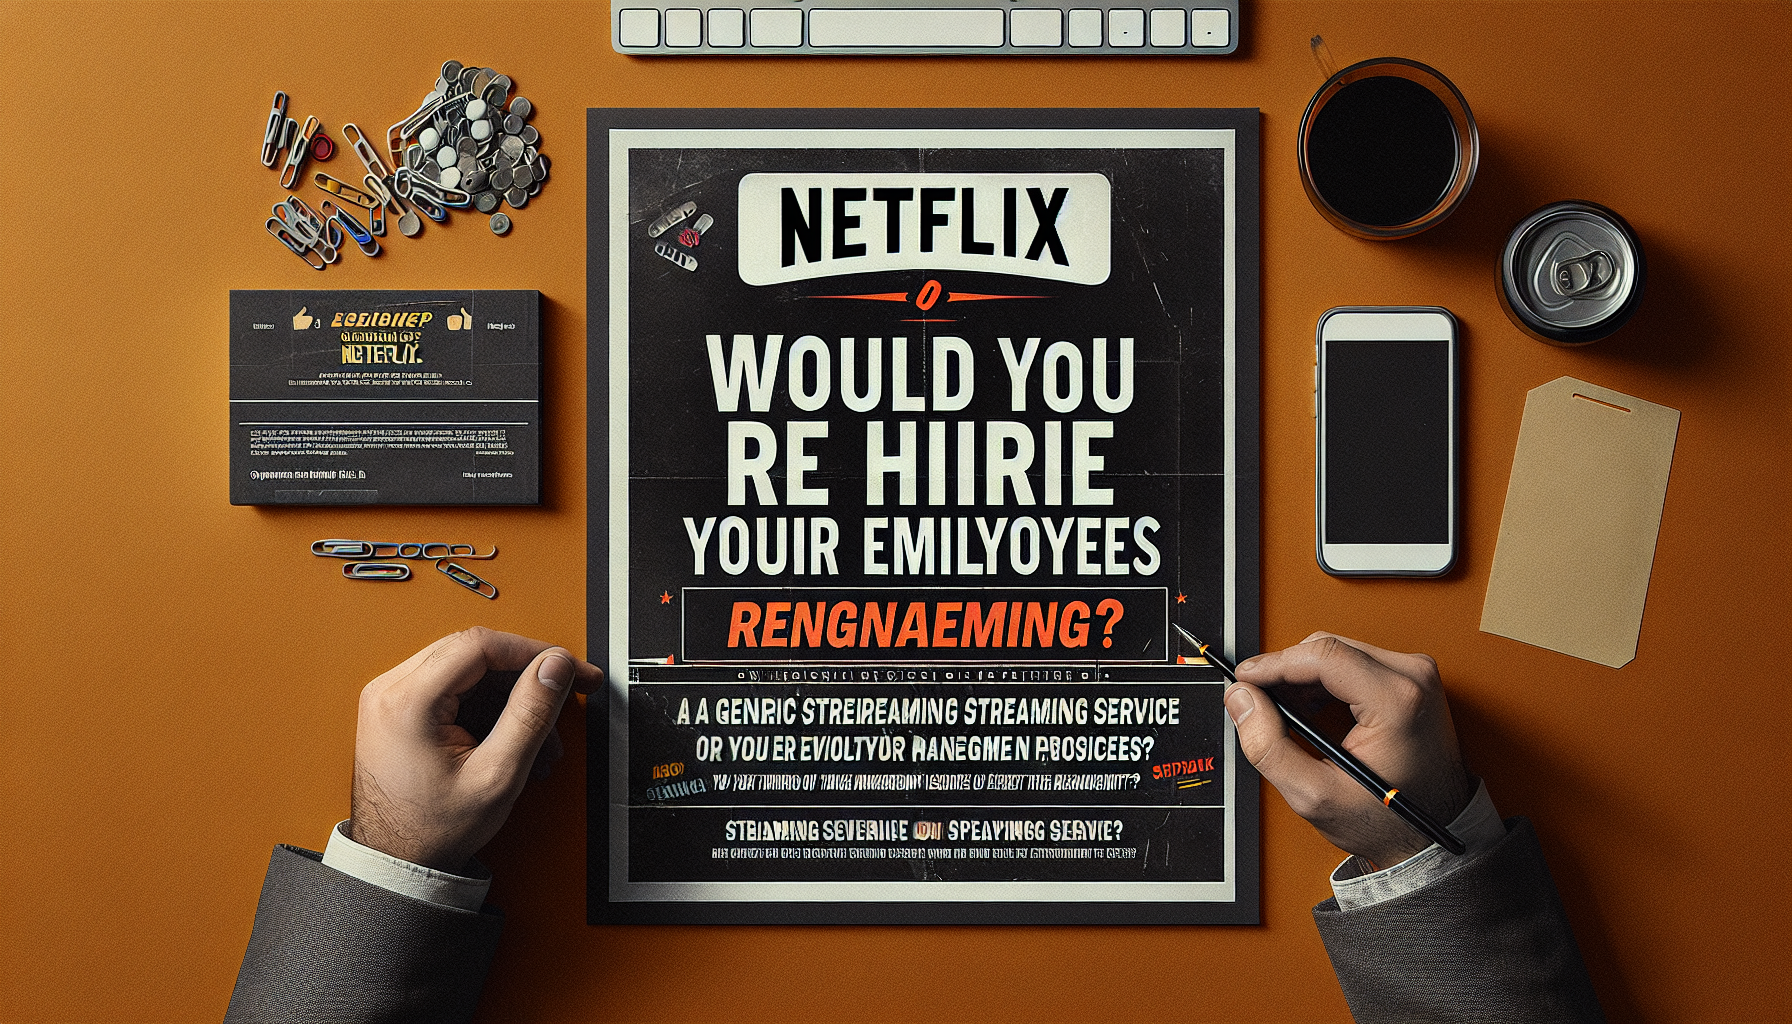 netflix encourages managers to consider rehiring their employees and to consider firing them if the answer is no. learn more about their approach to employee management.